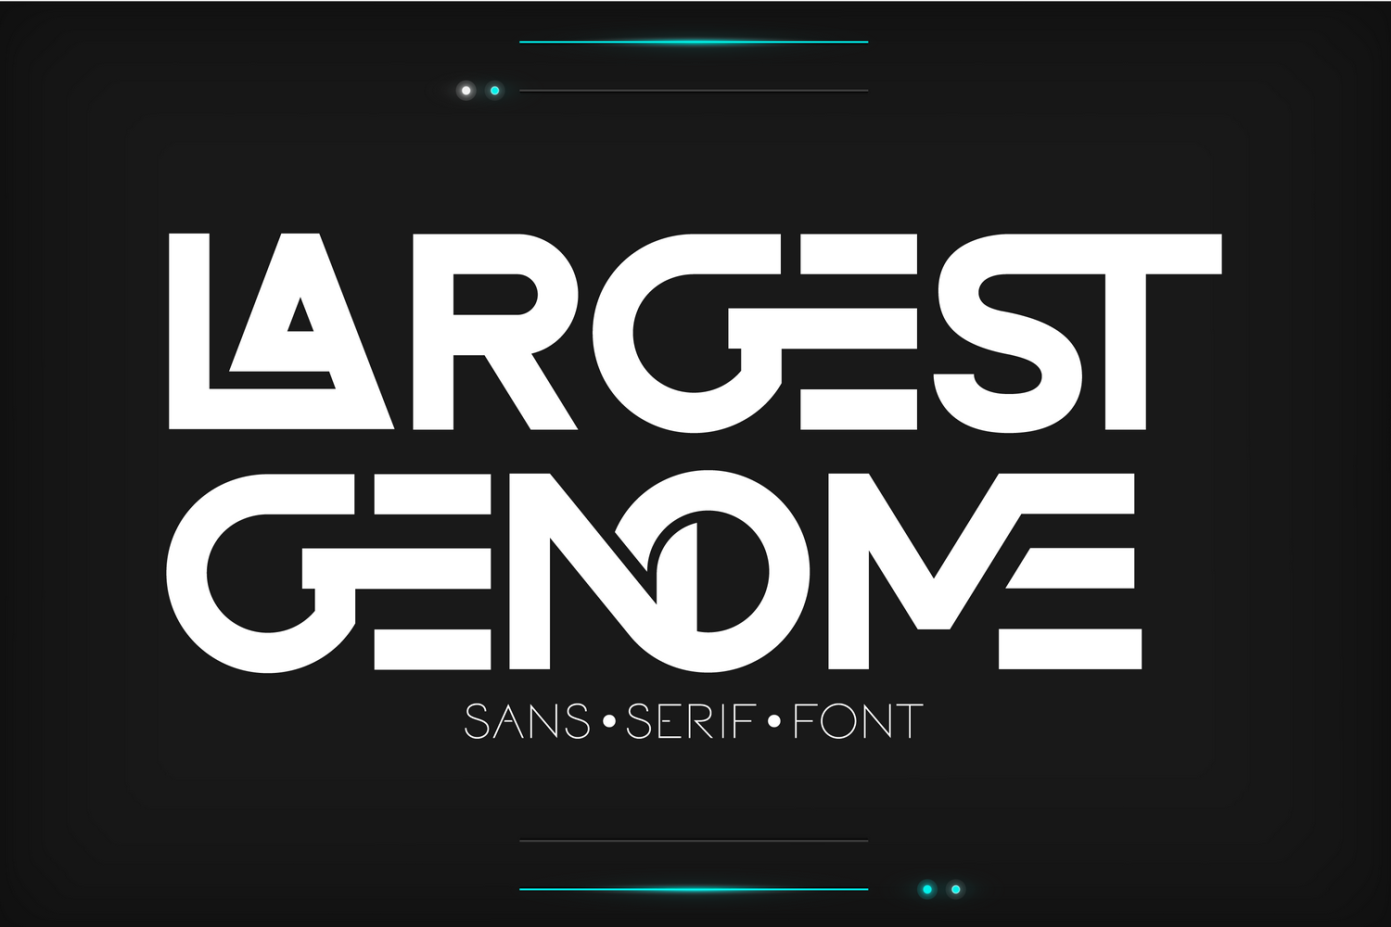 LARGEST-GENOME-FONT-1-BF6443b77135164